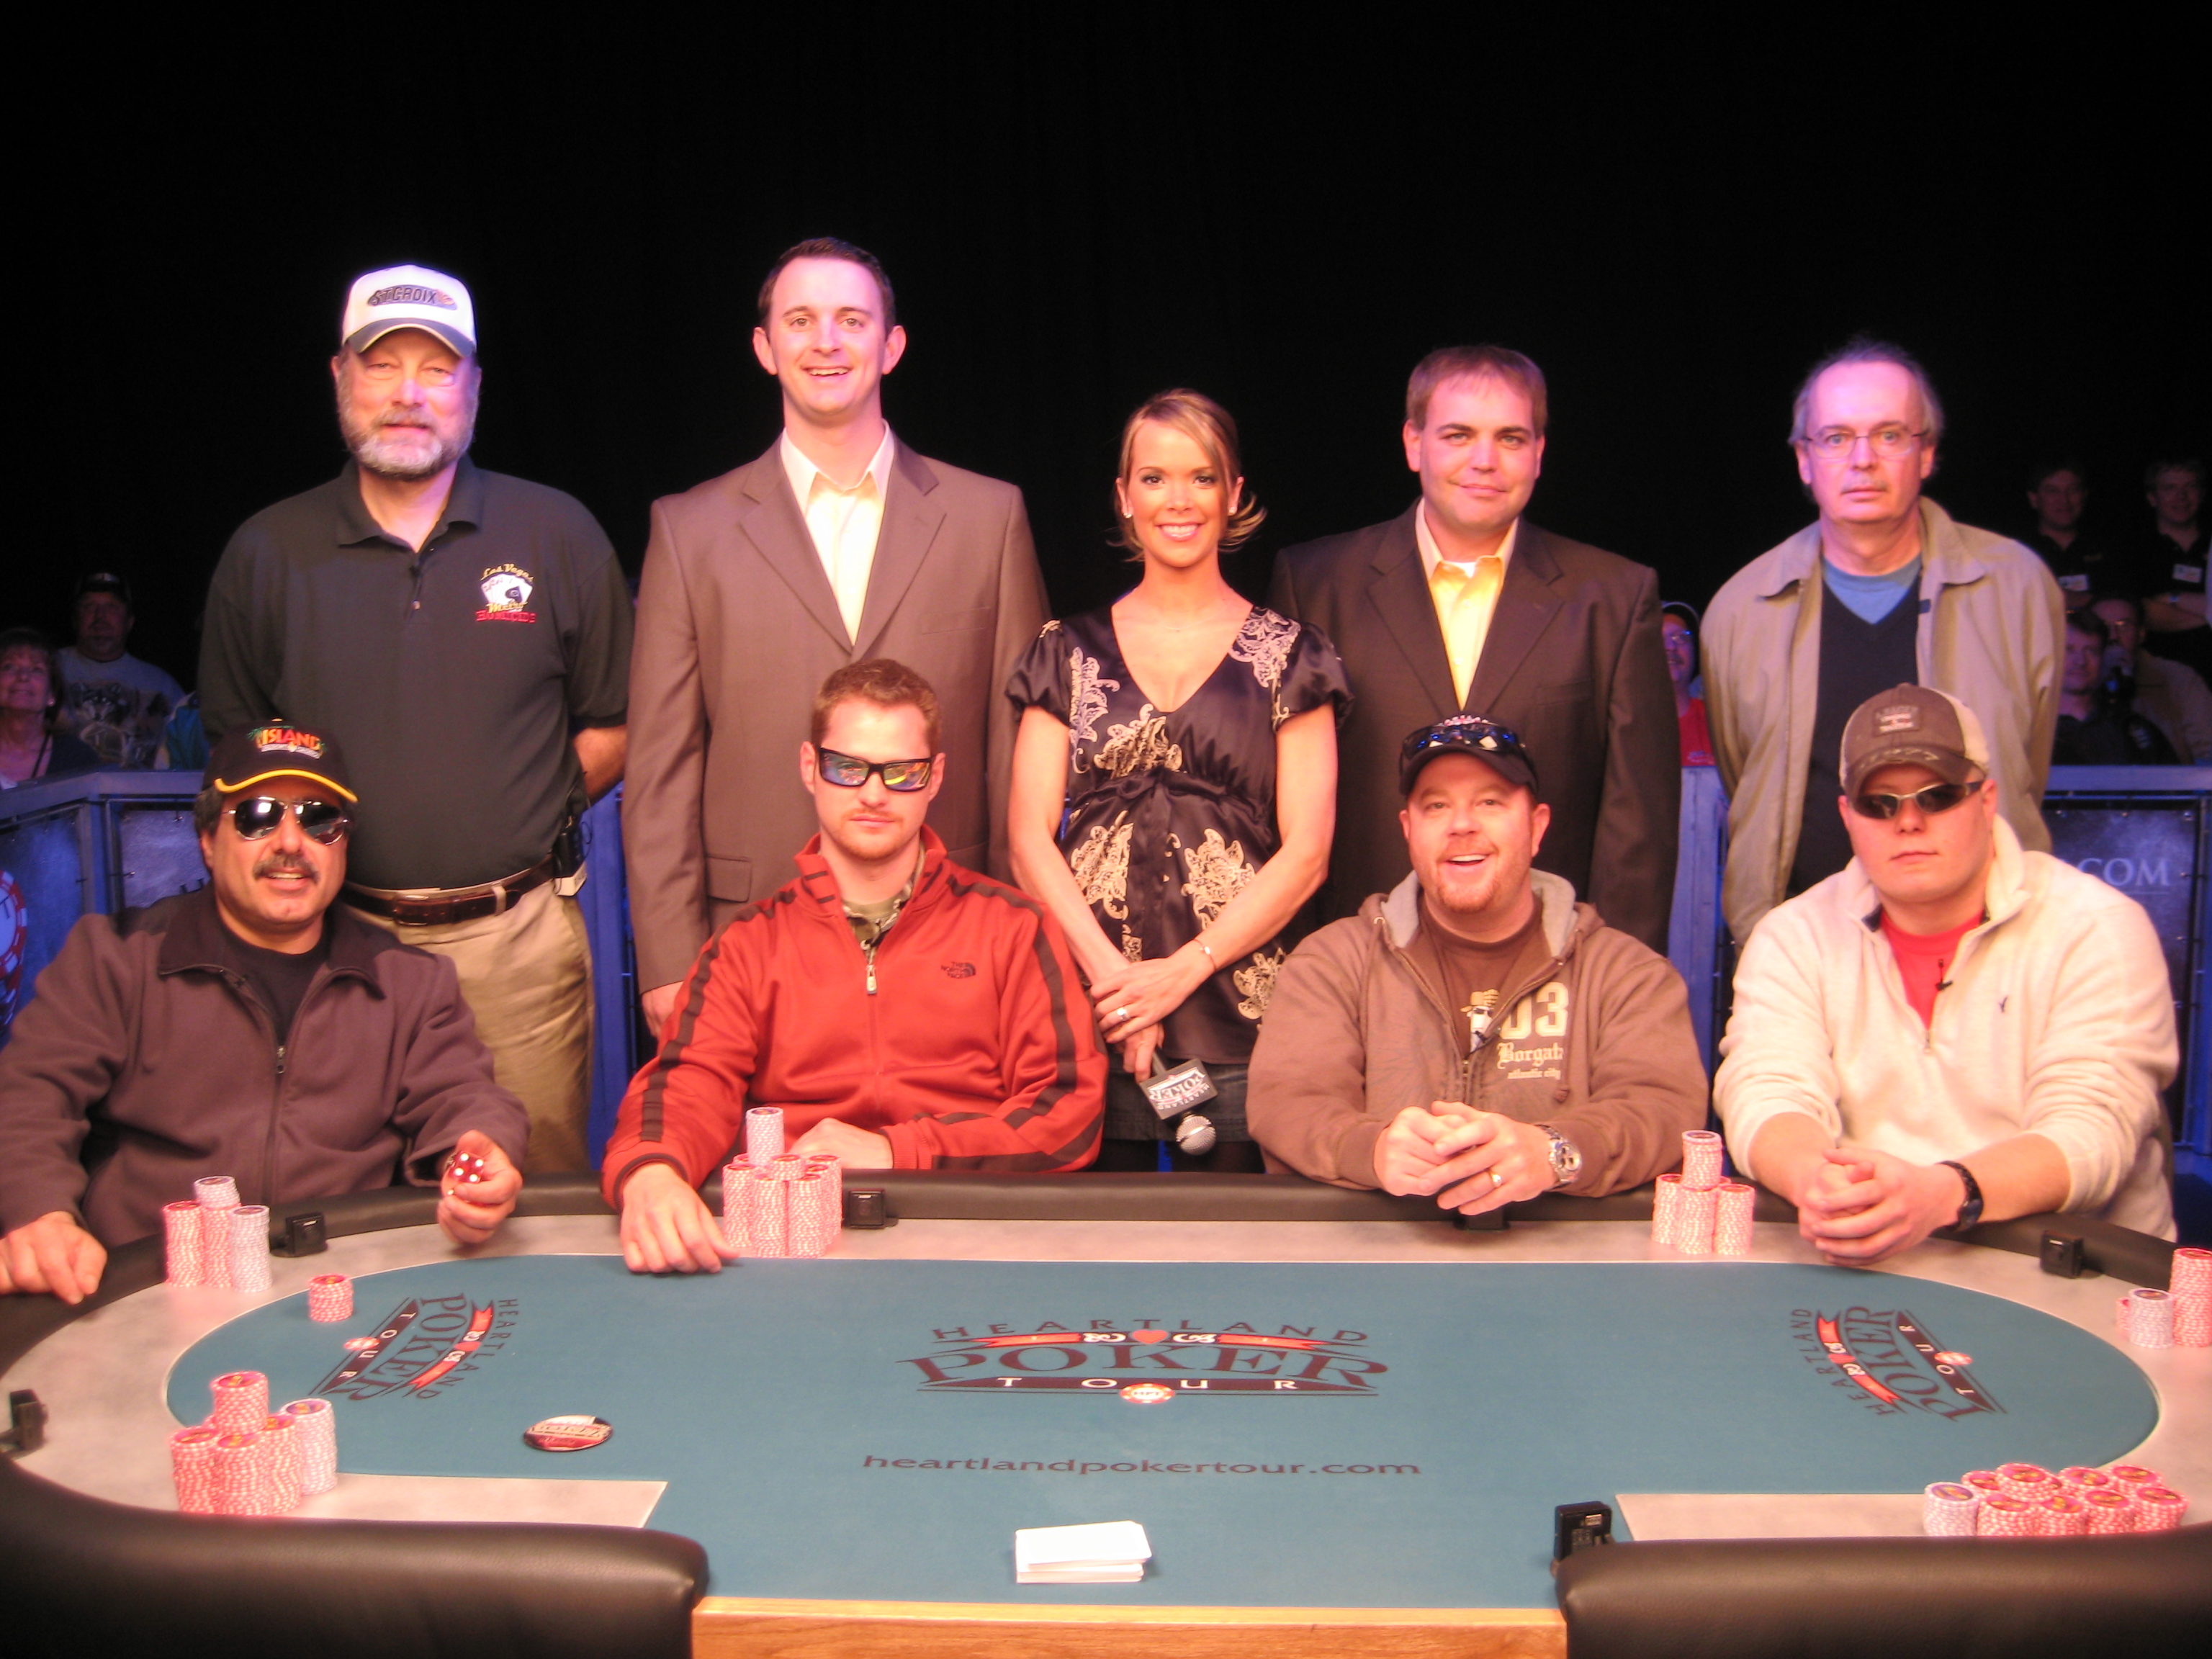 Heartland Poker Tour Pictures